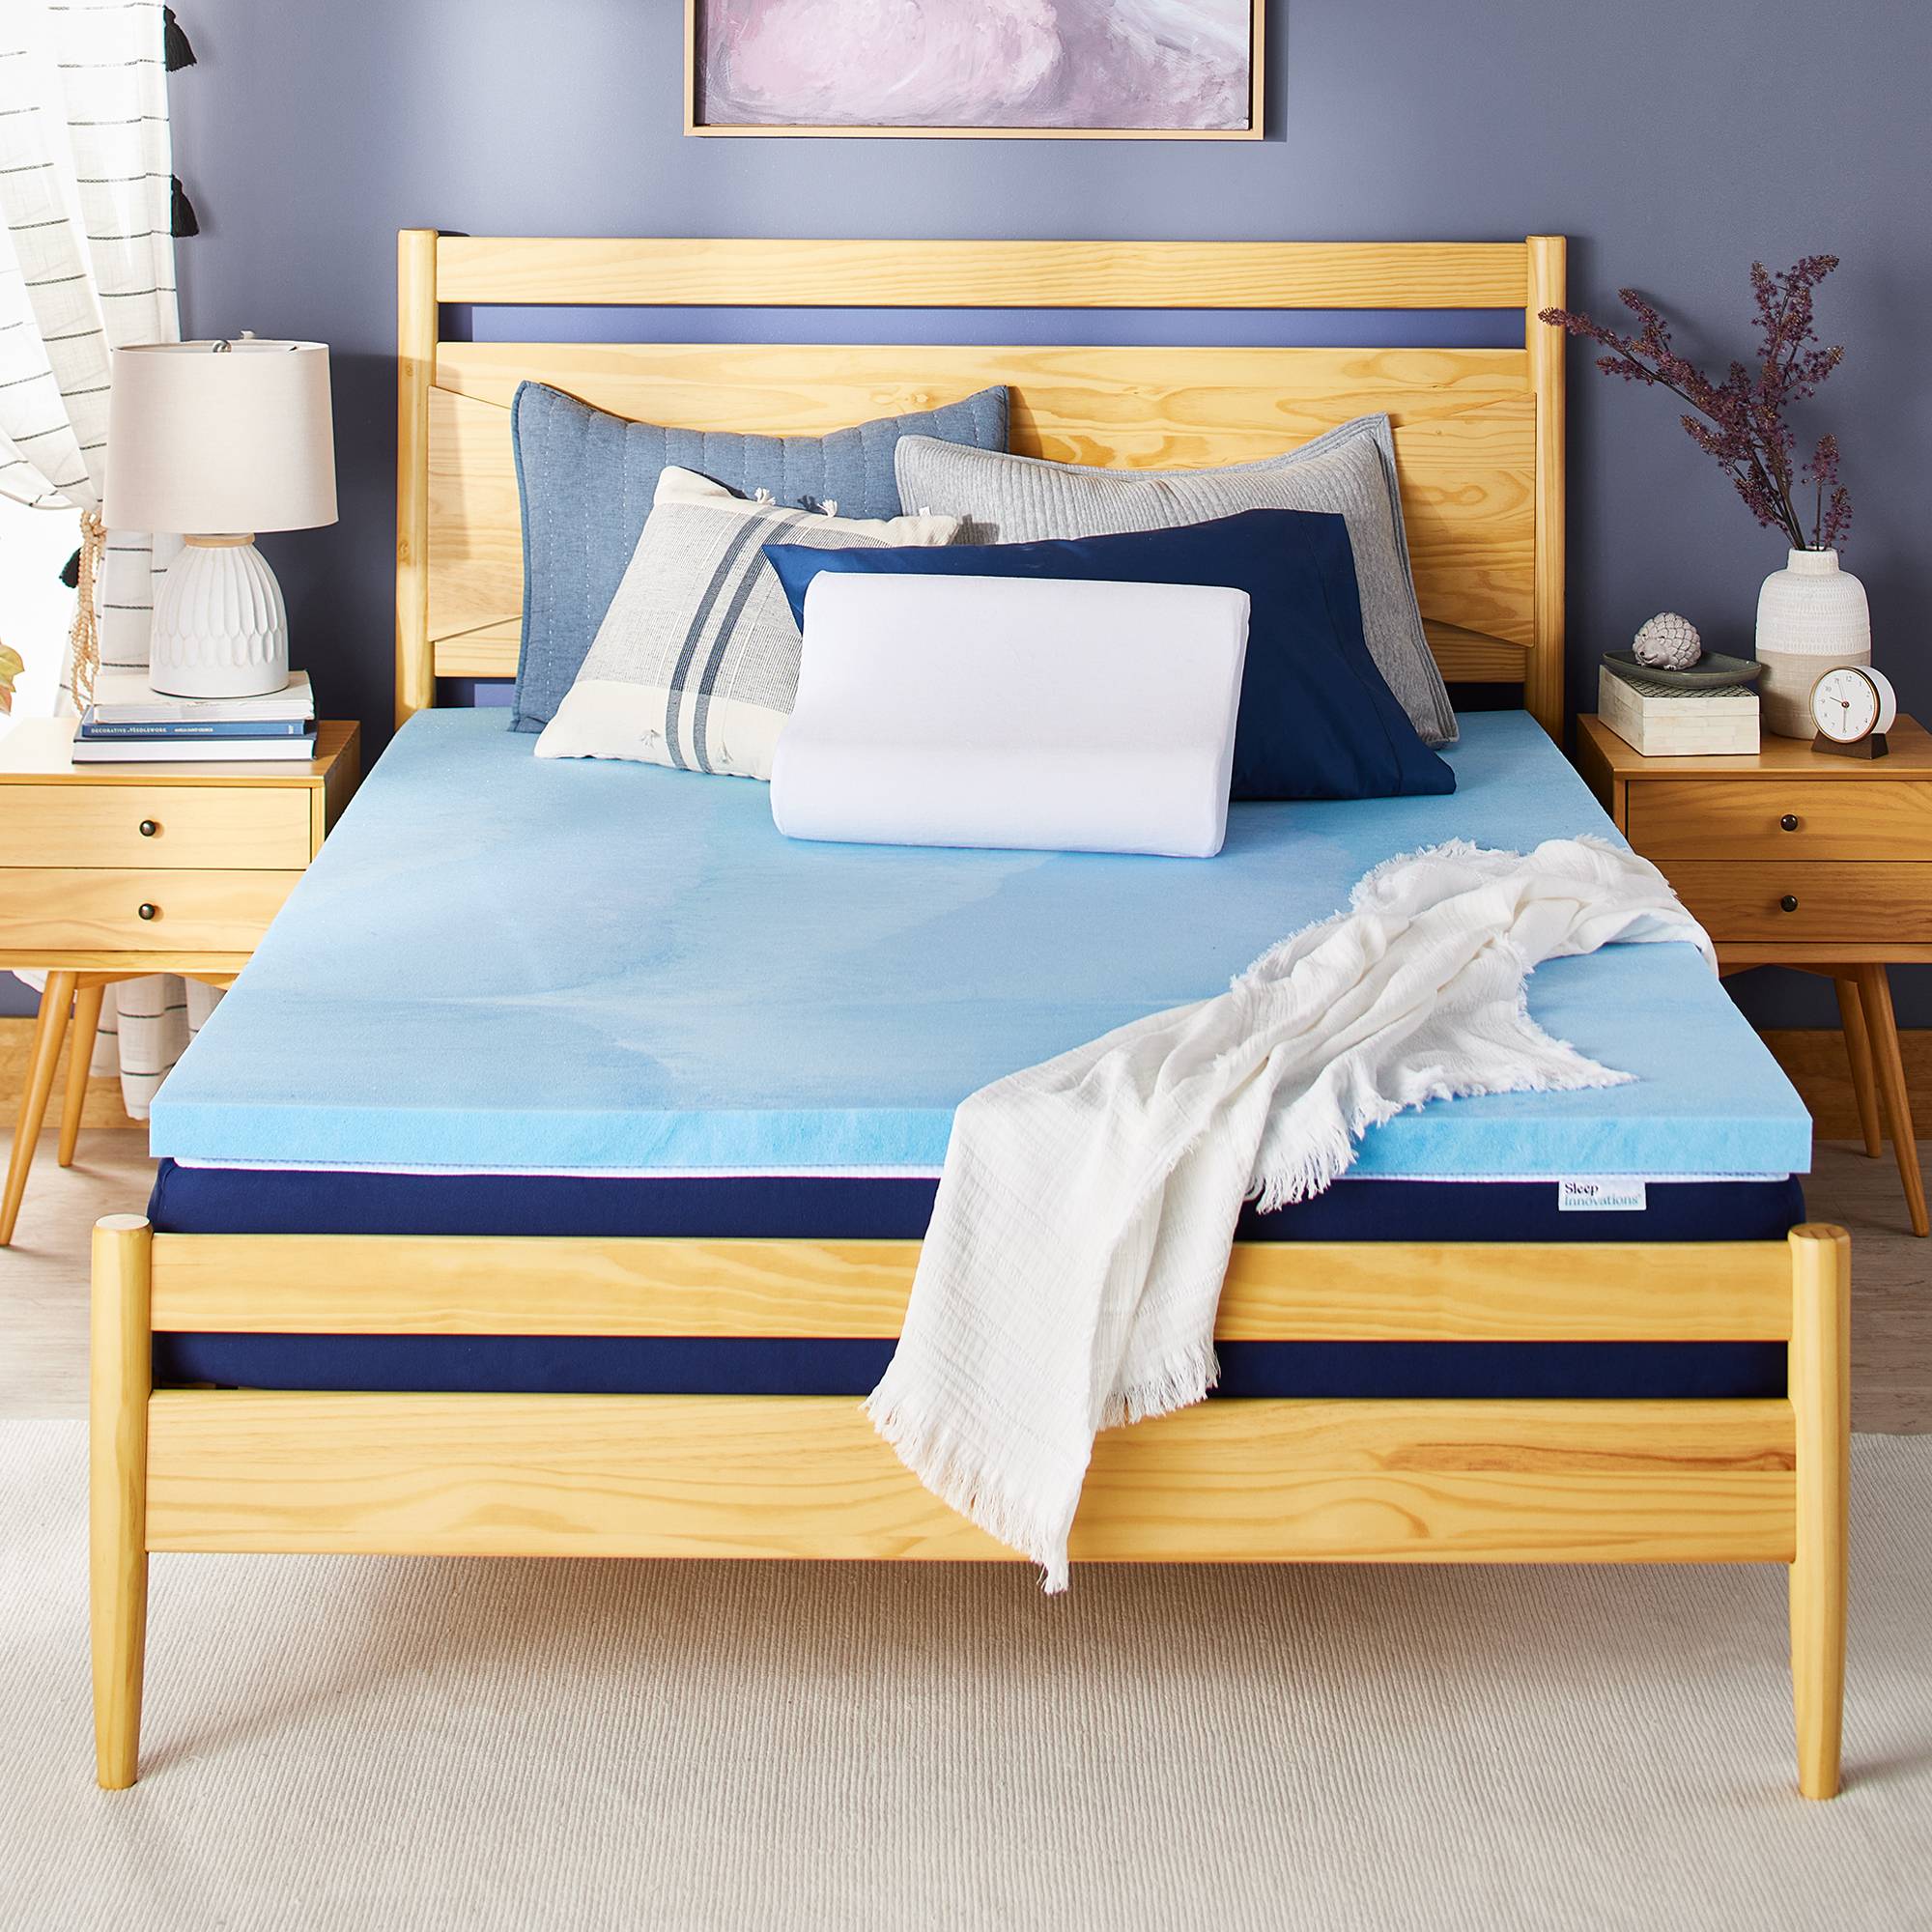 wapt image post 8 - Can You Sleep on a Mattress Topper? A Comprehensive Guide